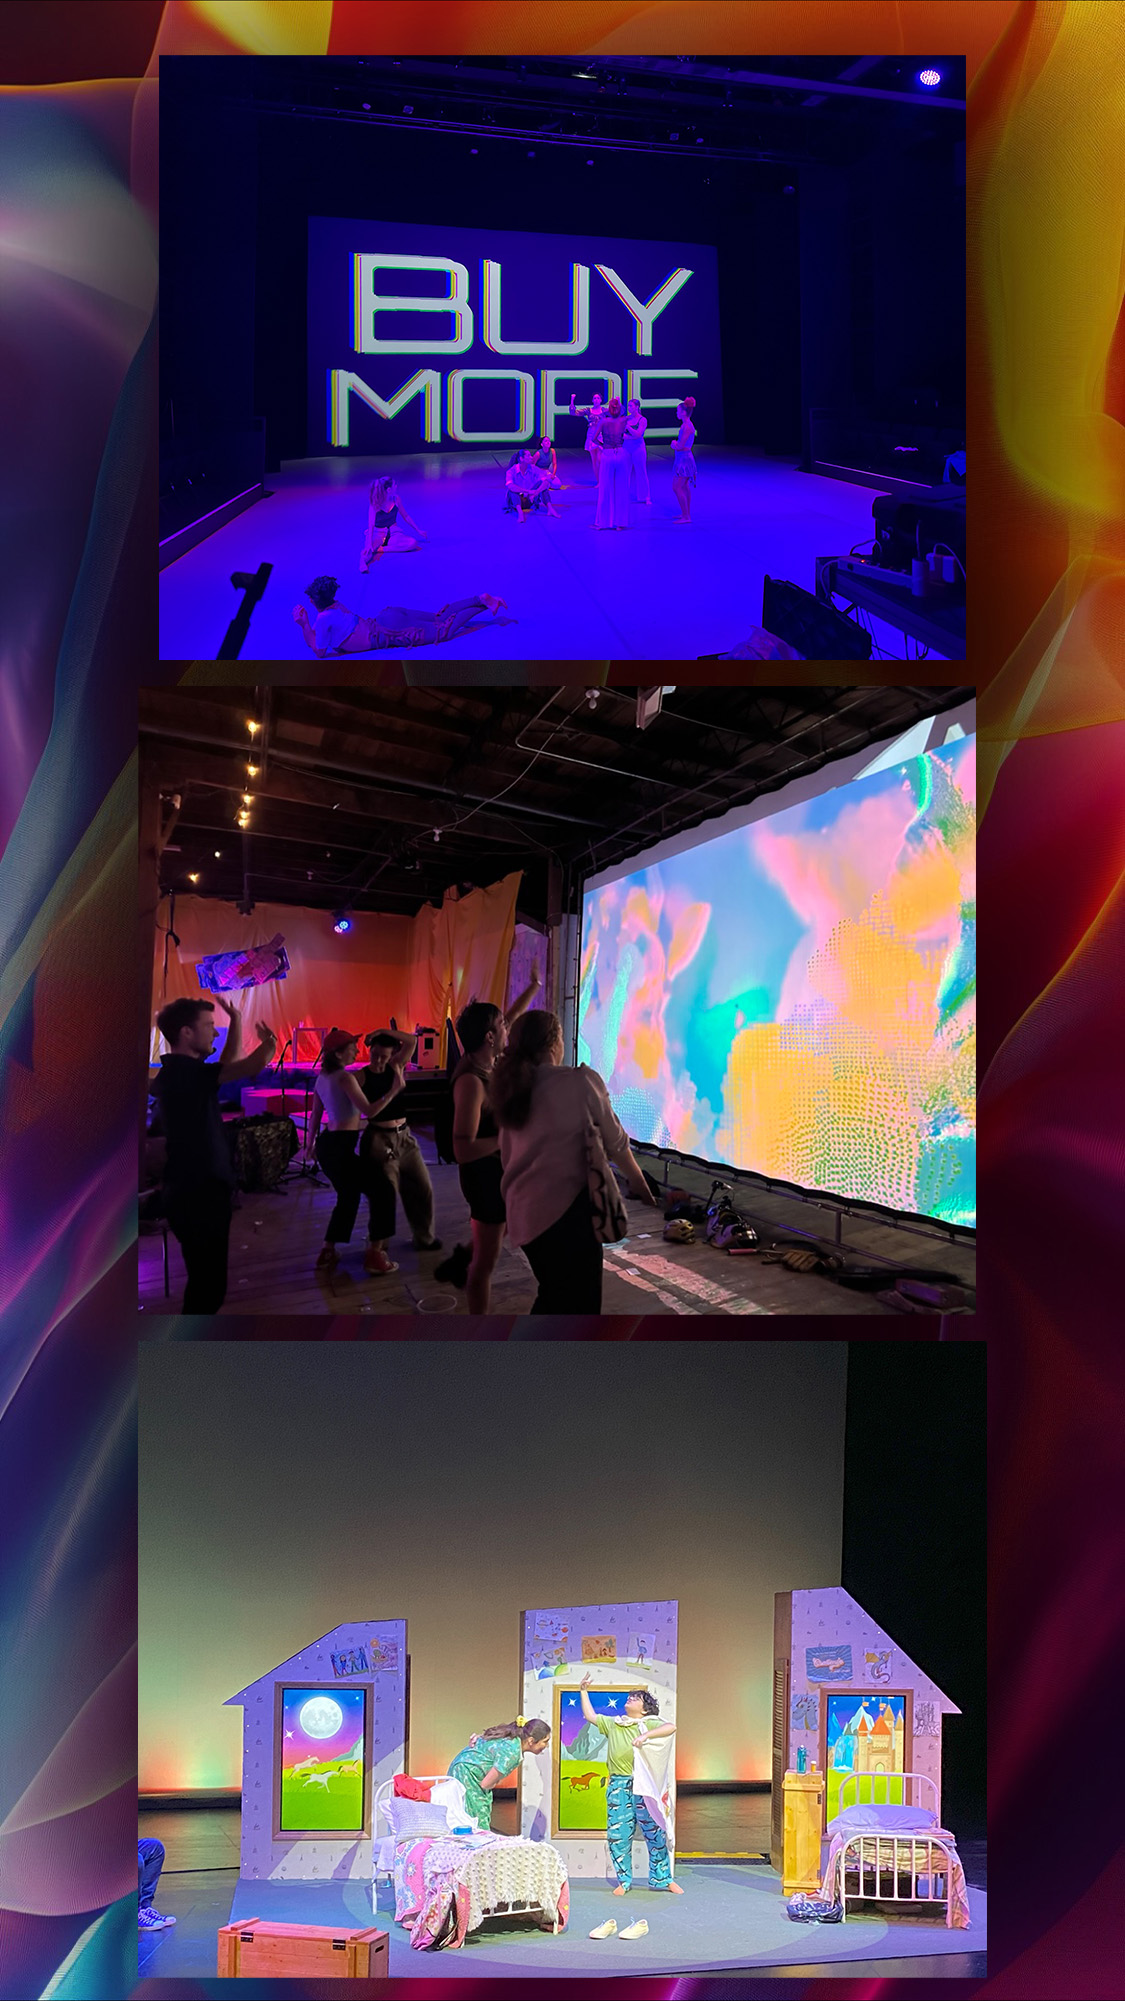 A multicolored banner of three show shots. The first shot is of a modern dance piece with all purple lighting and the words "BUY MORE" in all caps font projected on the back wall. The second image is of a crowd in a art installation interacting with a wall projection that appears to create technicolor shapes that mirror their bodies. The third image is a of a modular children's theatre set with TV screens built into it. Actors appear to be playing out a daydream on front of screens filled with Magical Images of castles in bright cartoon colors. 